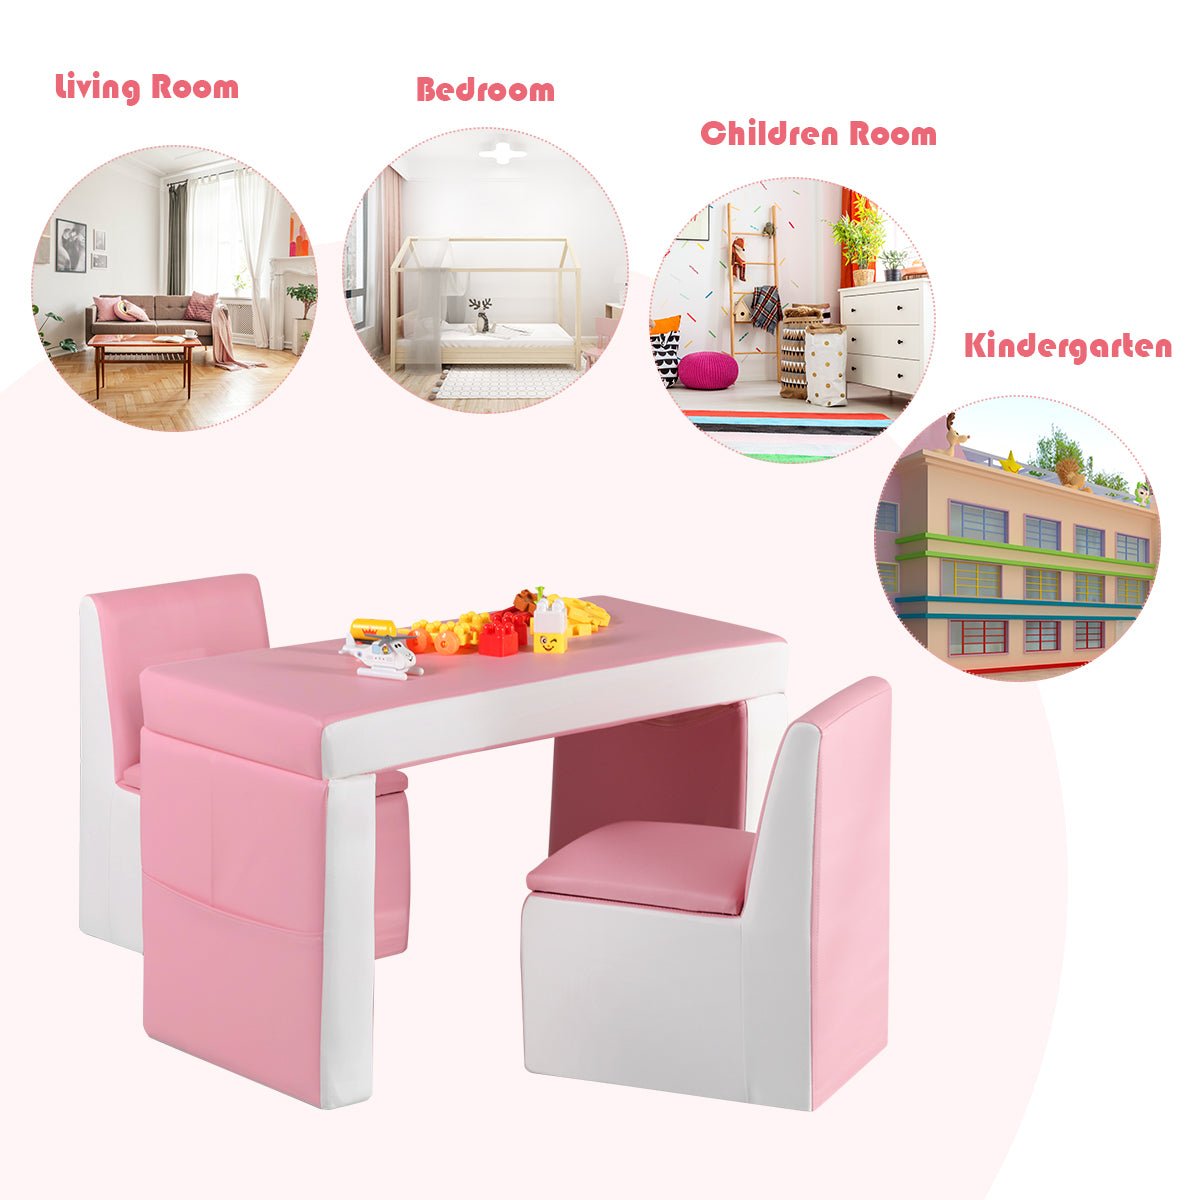 Children's Pink Sofa with Storage - Relax, Play, Tidy Up